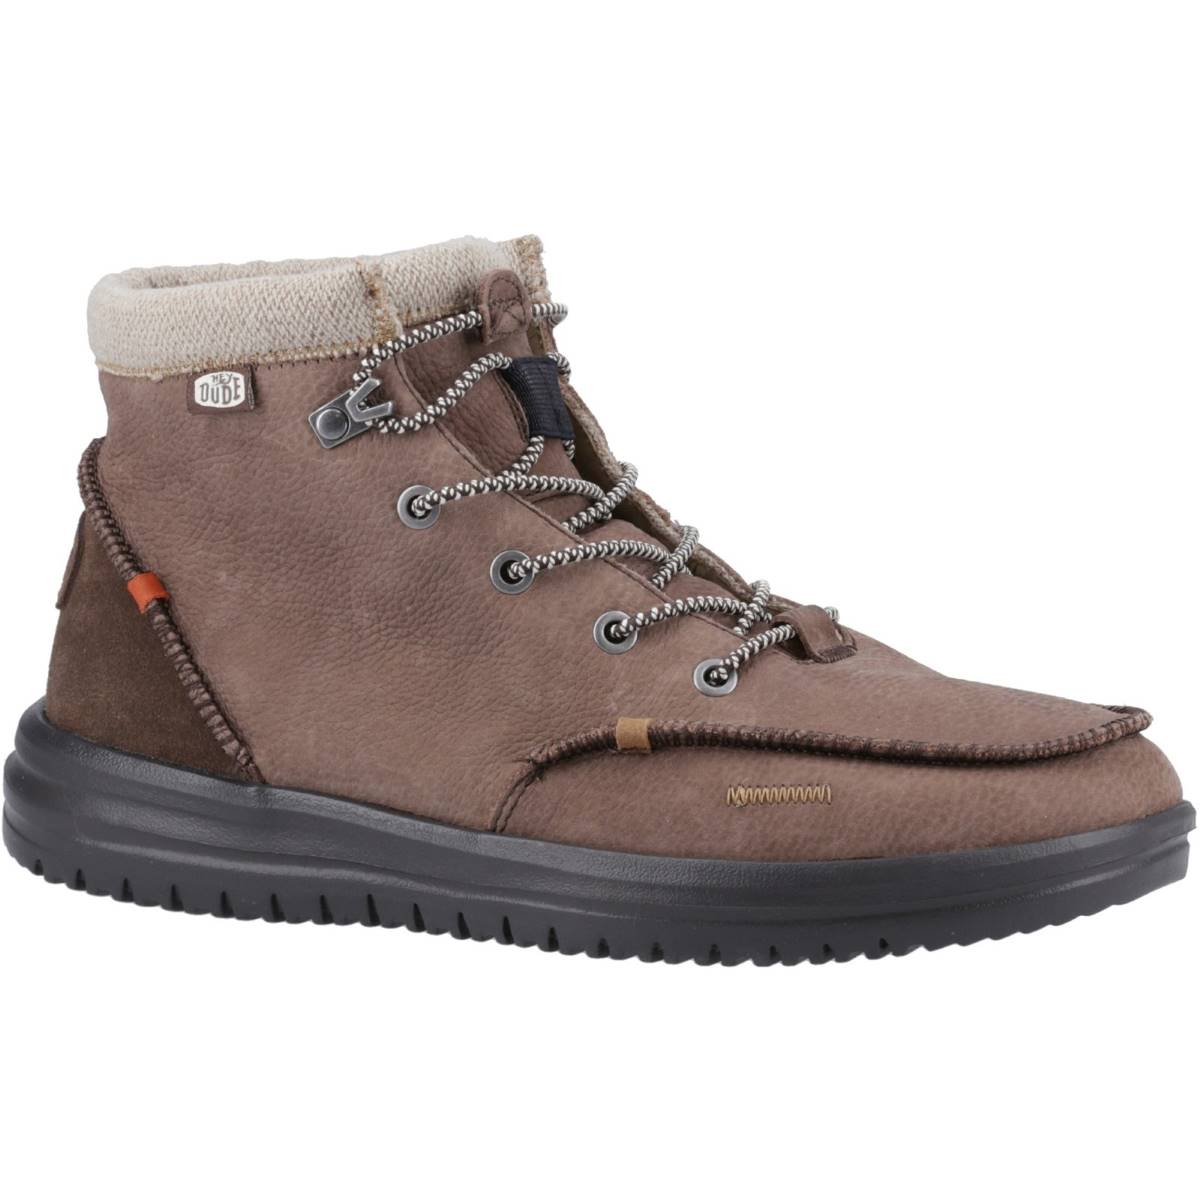 Hey Dude Bradley Brown Mens boots 40189-255 in a Plain  in Size 12